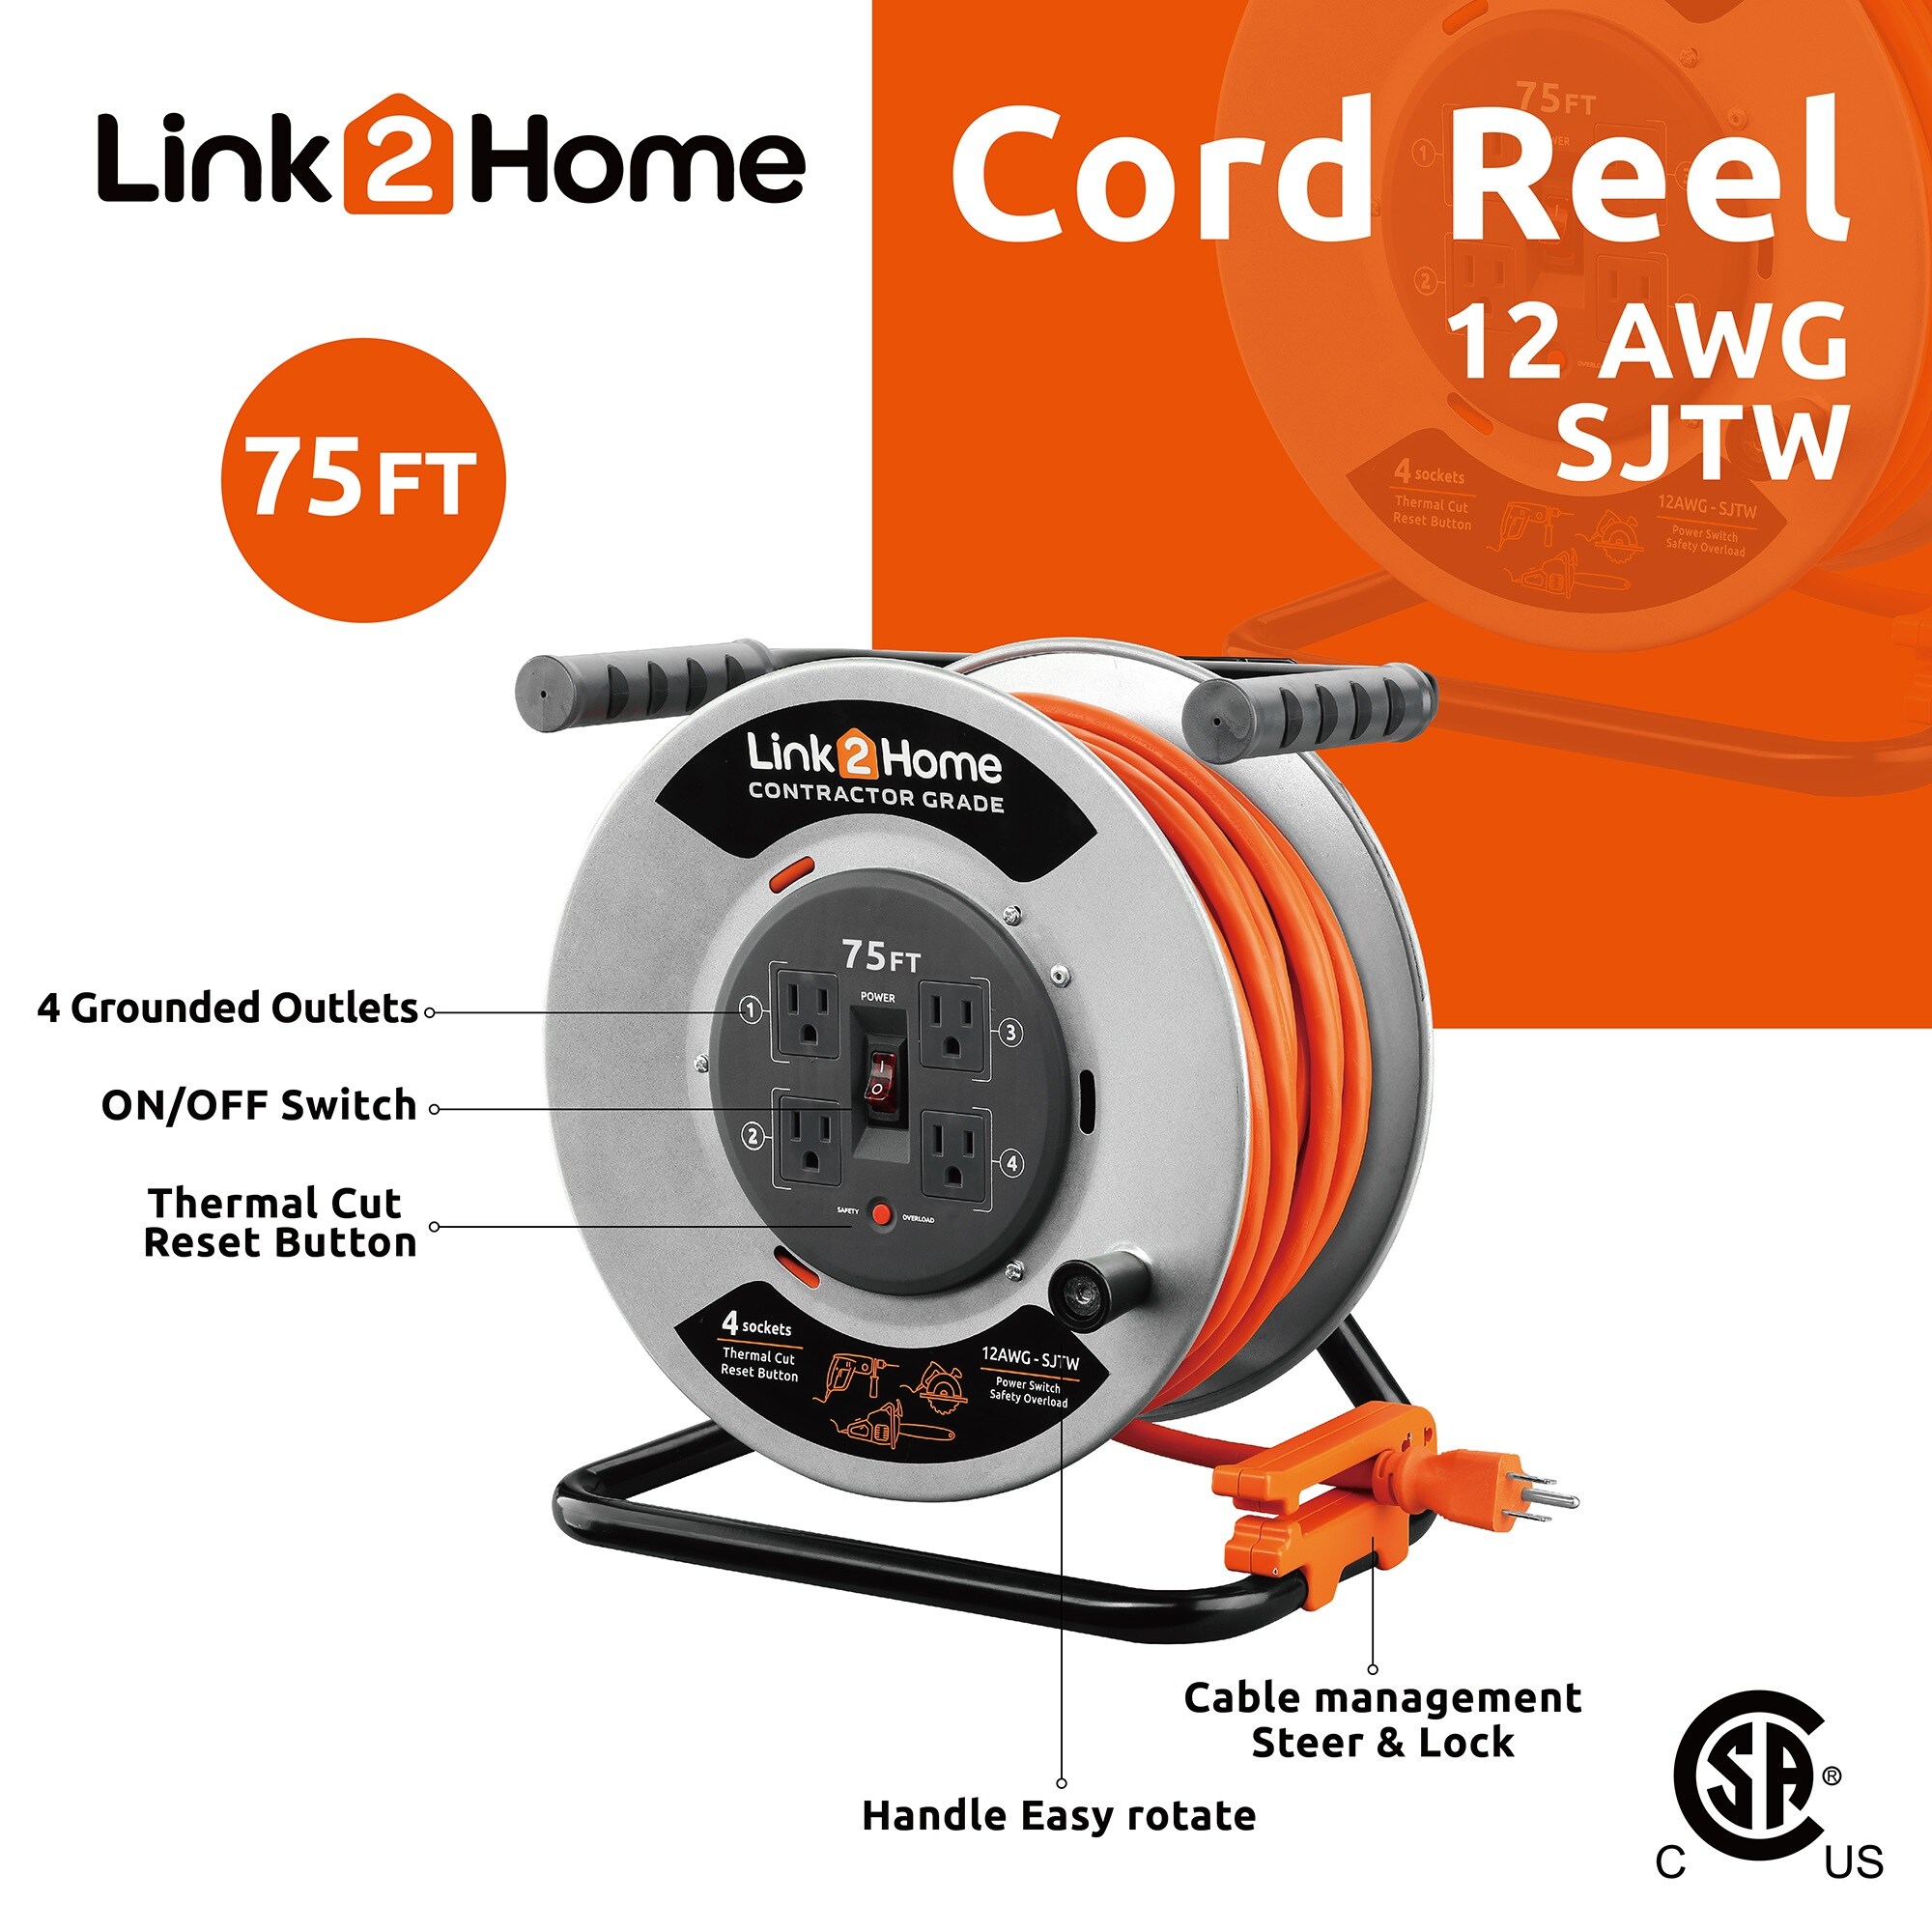 LINK2HOME Link2Home cord reel 75-ft 12 / 3-Prong Indoor Sjtw Heavy Duty General Extension Cord